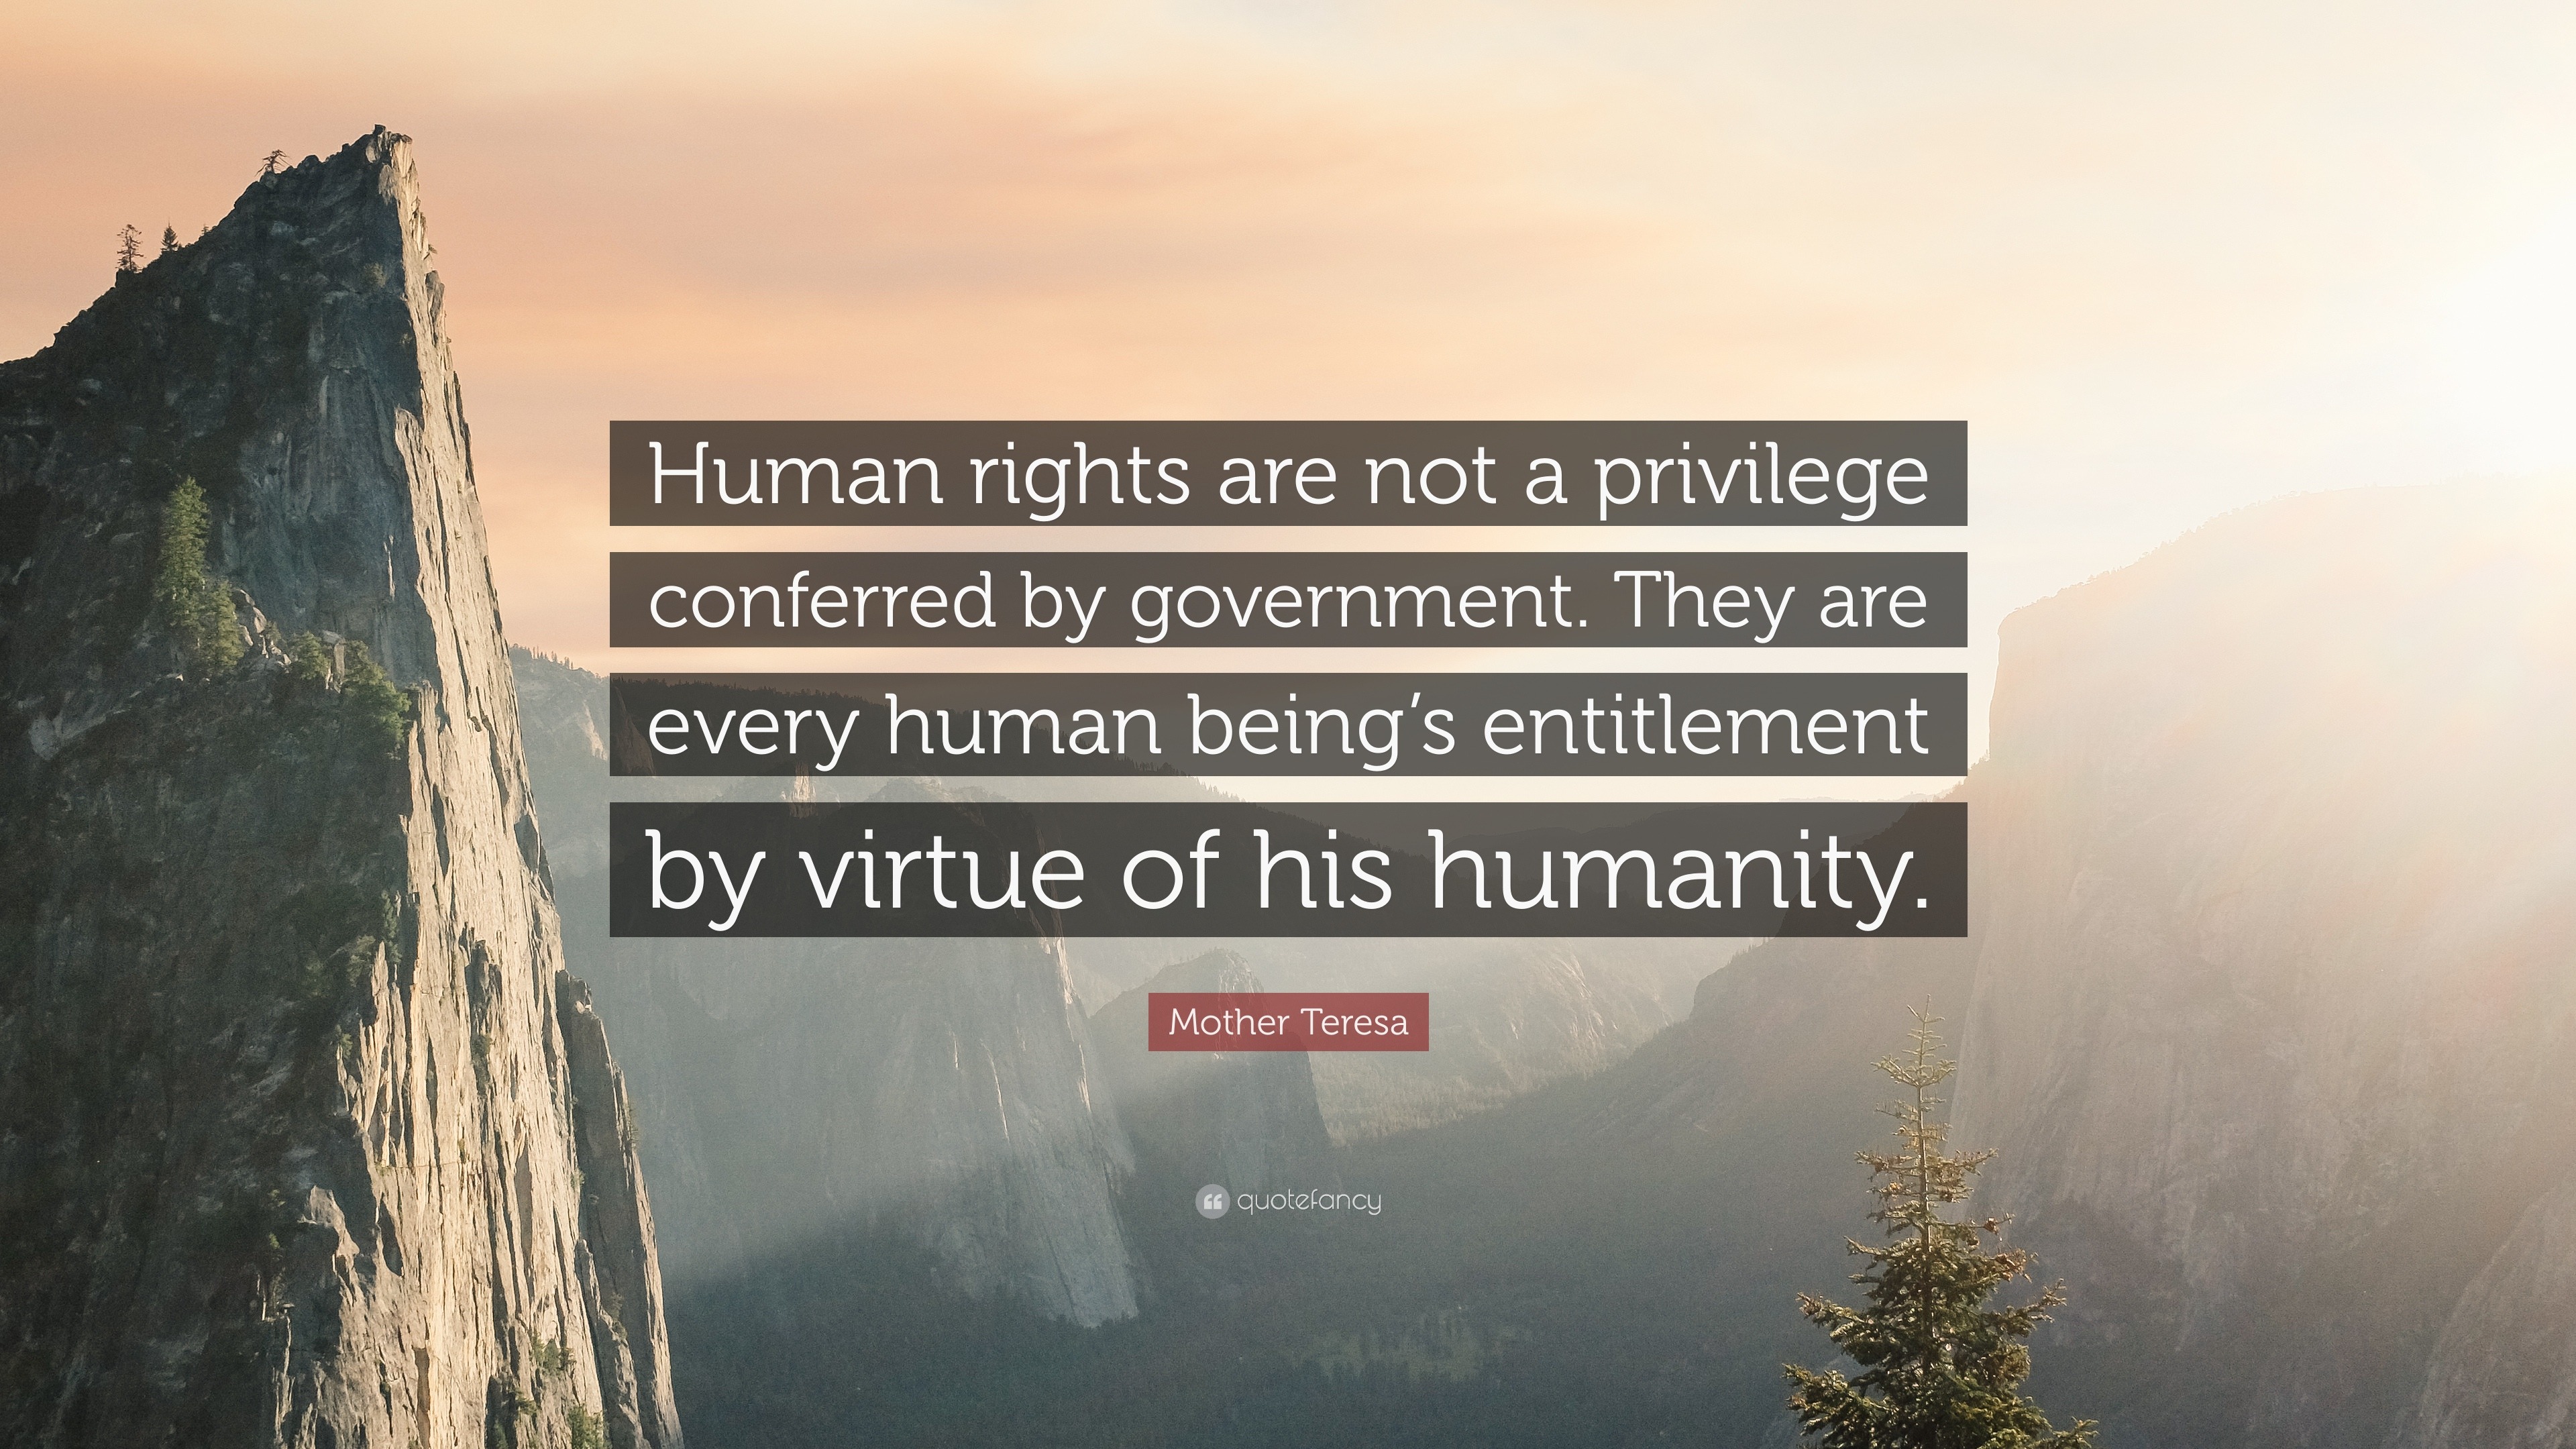 essay on human rights with quotations